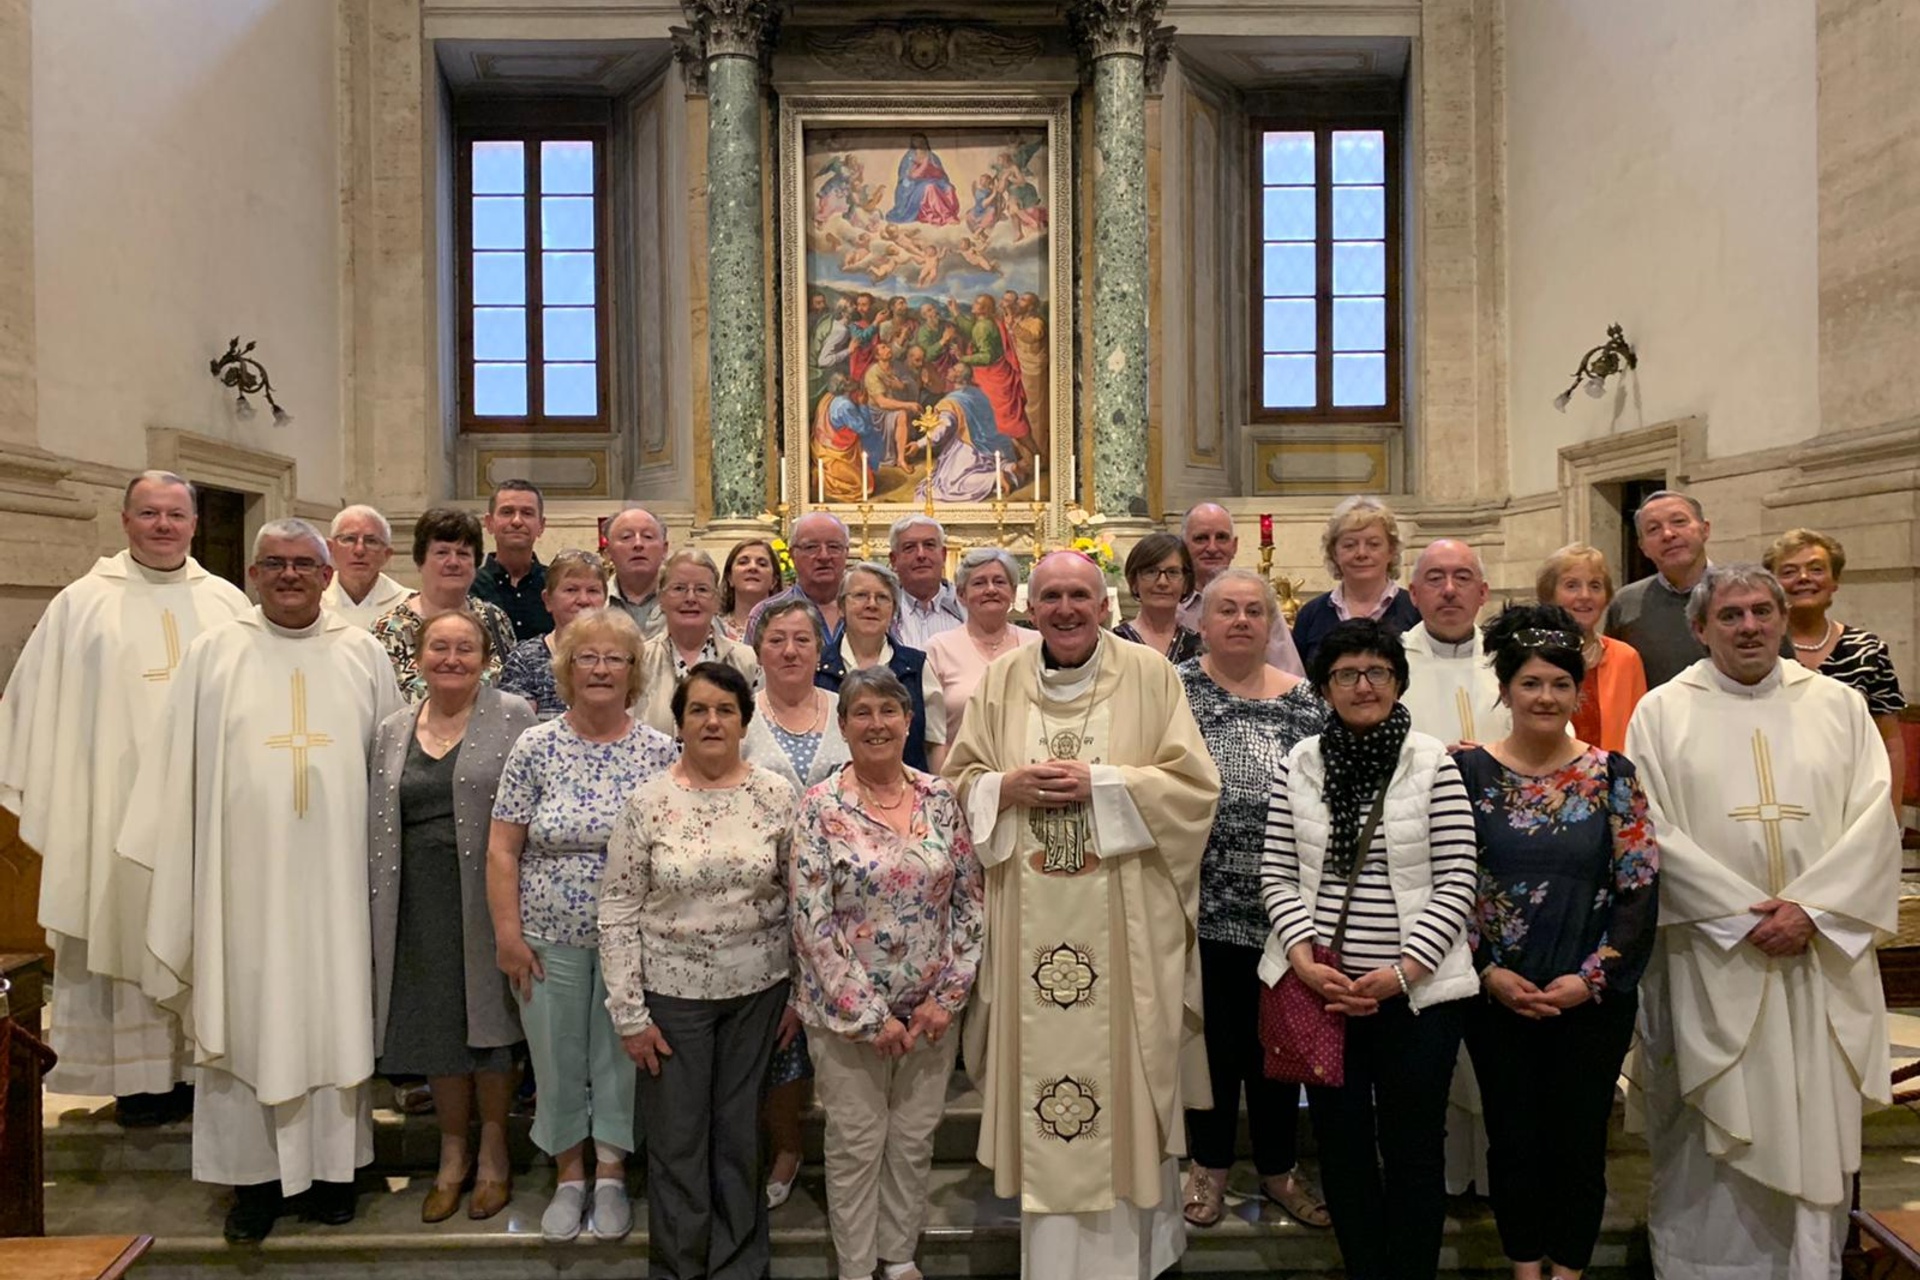 Video of the Limerick group in Rome where they visited the Basilica of Mary Majors